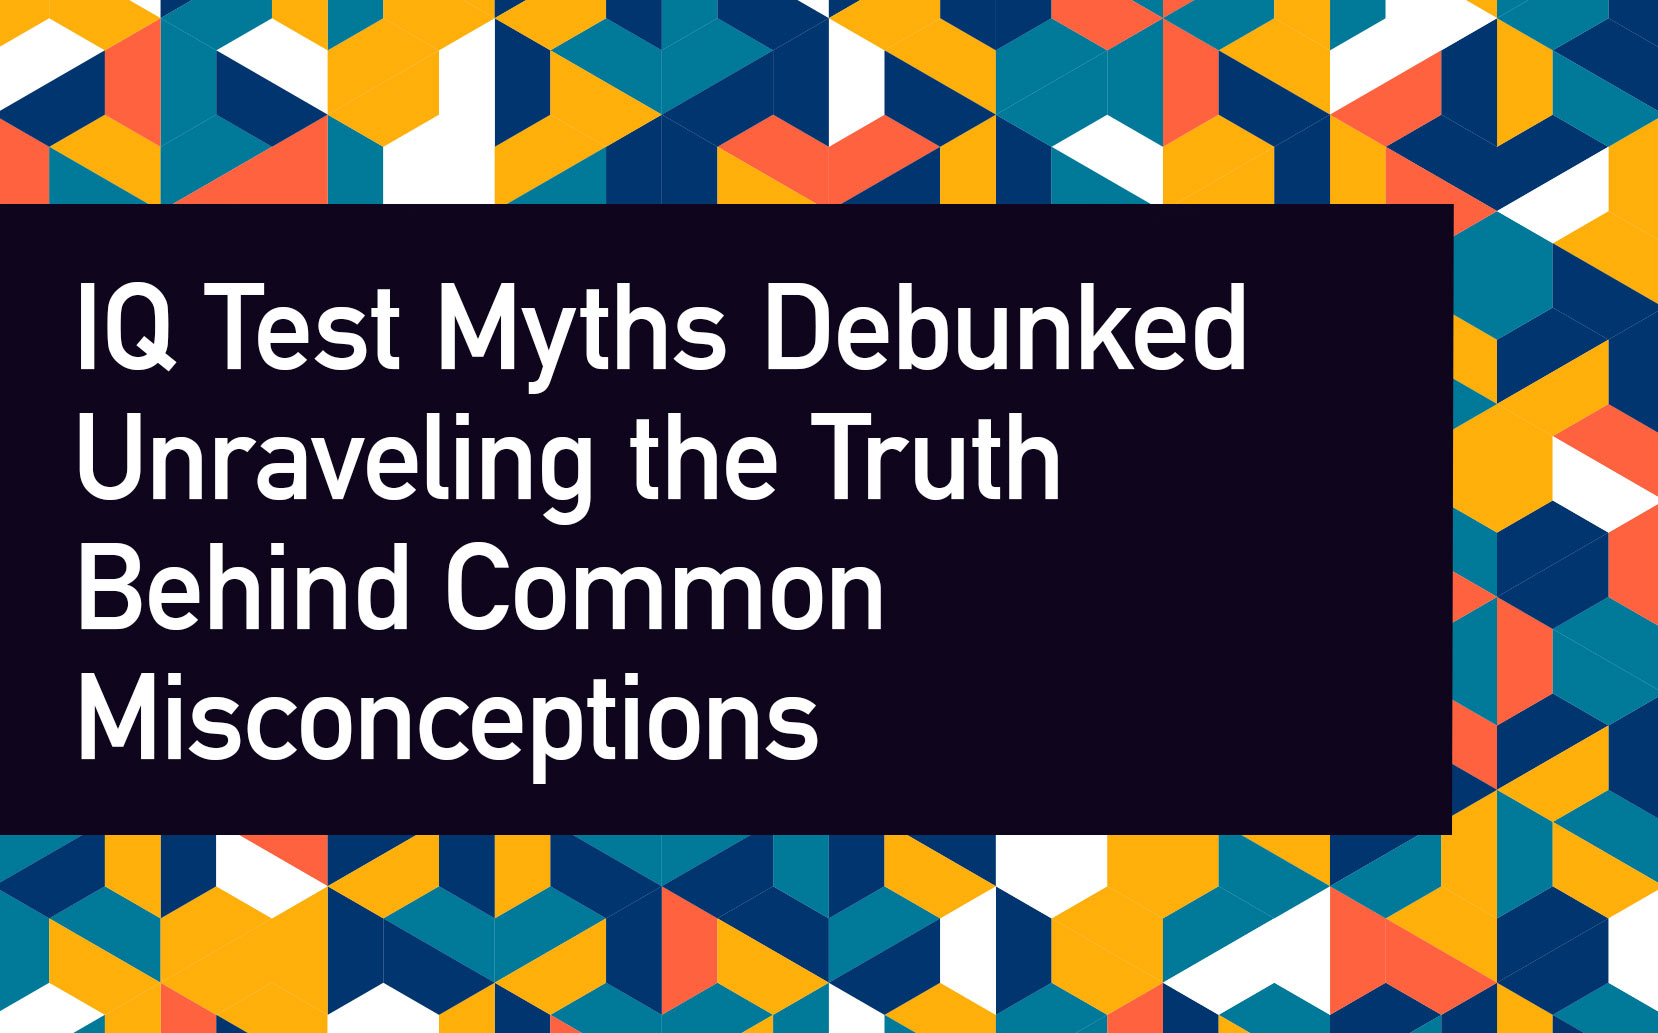 IQ Test Myths Debunked: Unraveling the Truth Behind Common Misconceptions